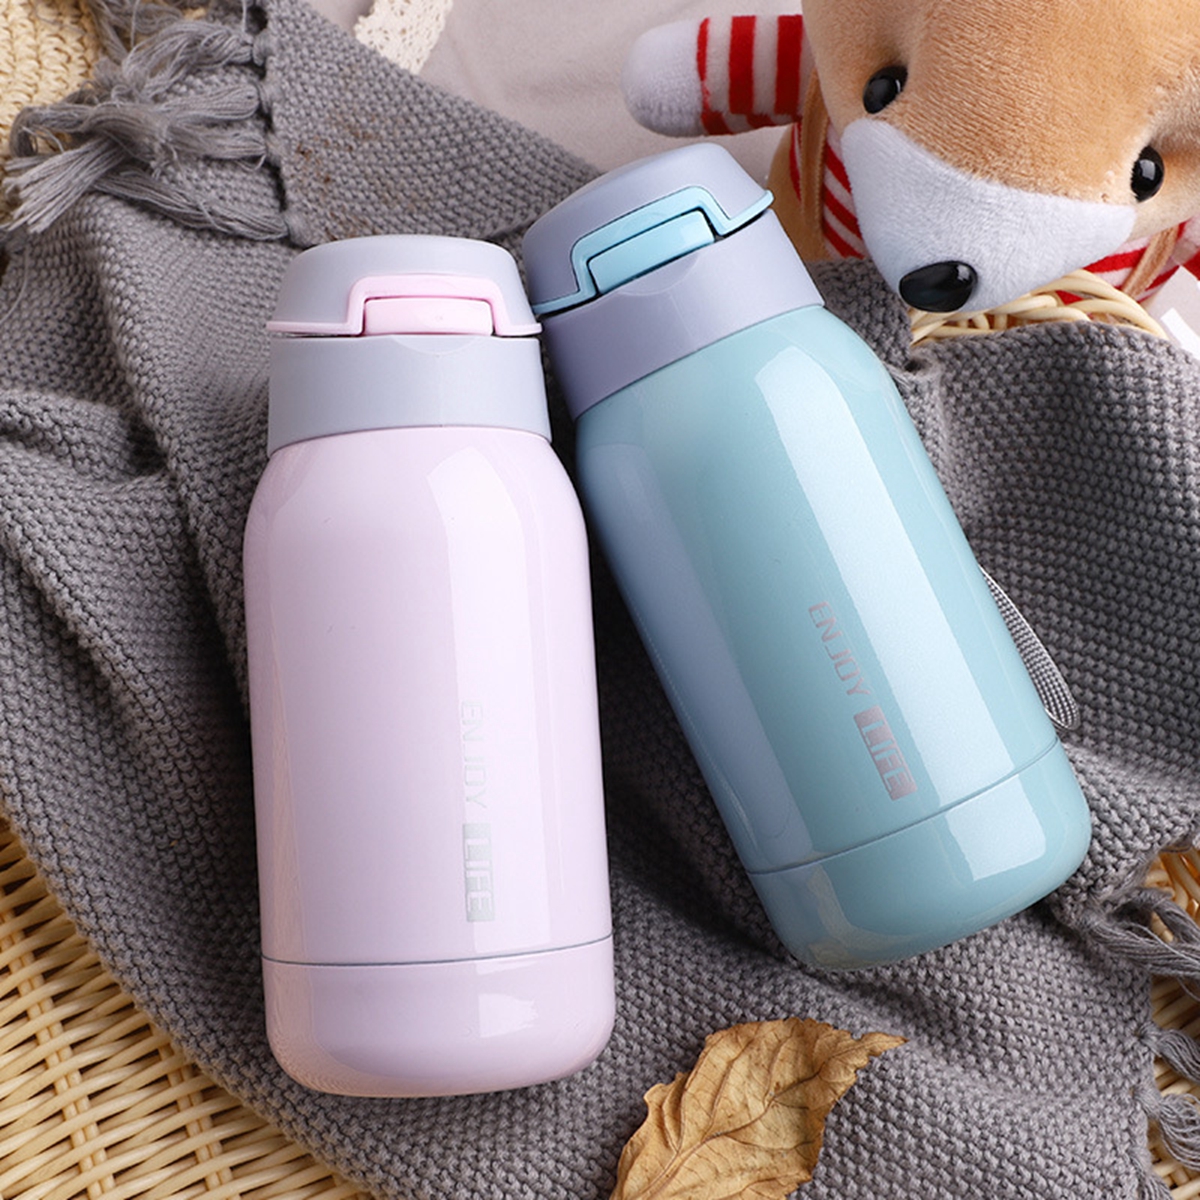 MXMIO Sports Vacuum Flask Travel Mug Thermos Cup Insulation Portable Creative Stainless Steel with Straw Adults Kids Children Thermos Bottle/Multicolor